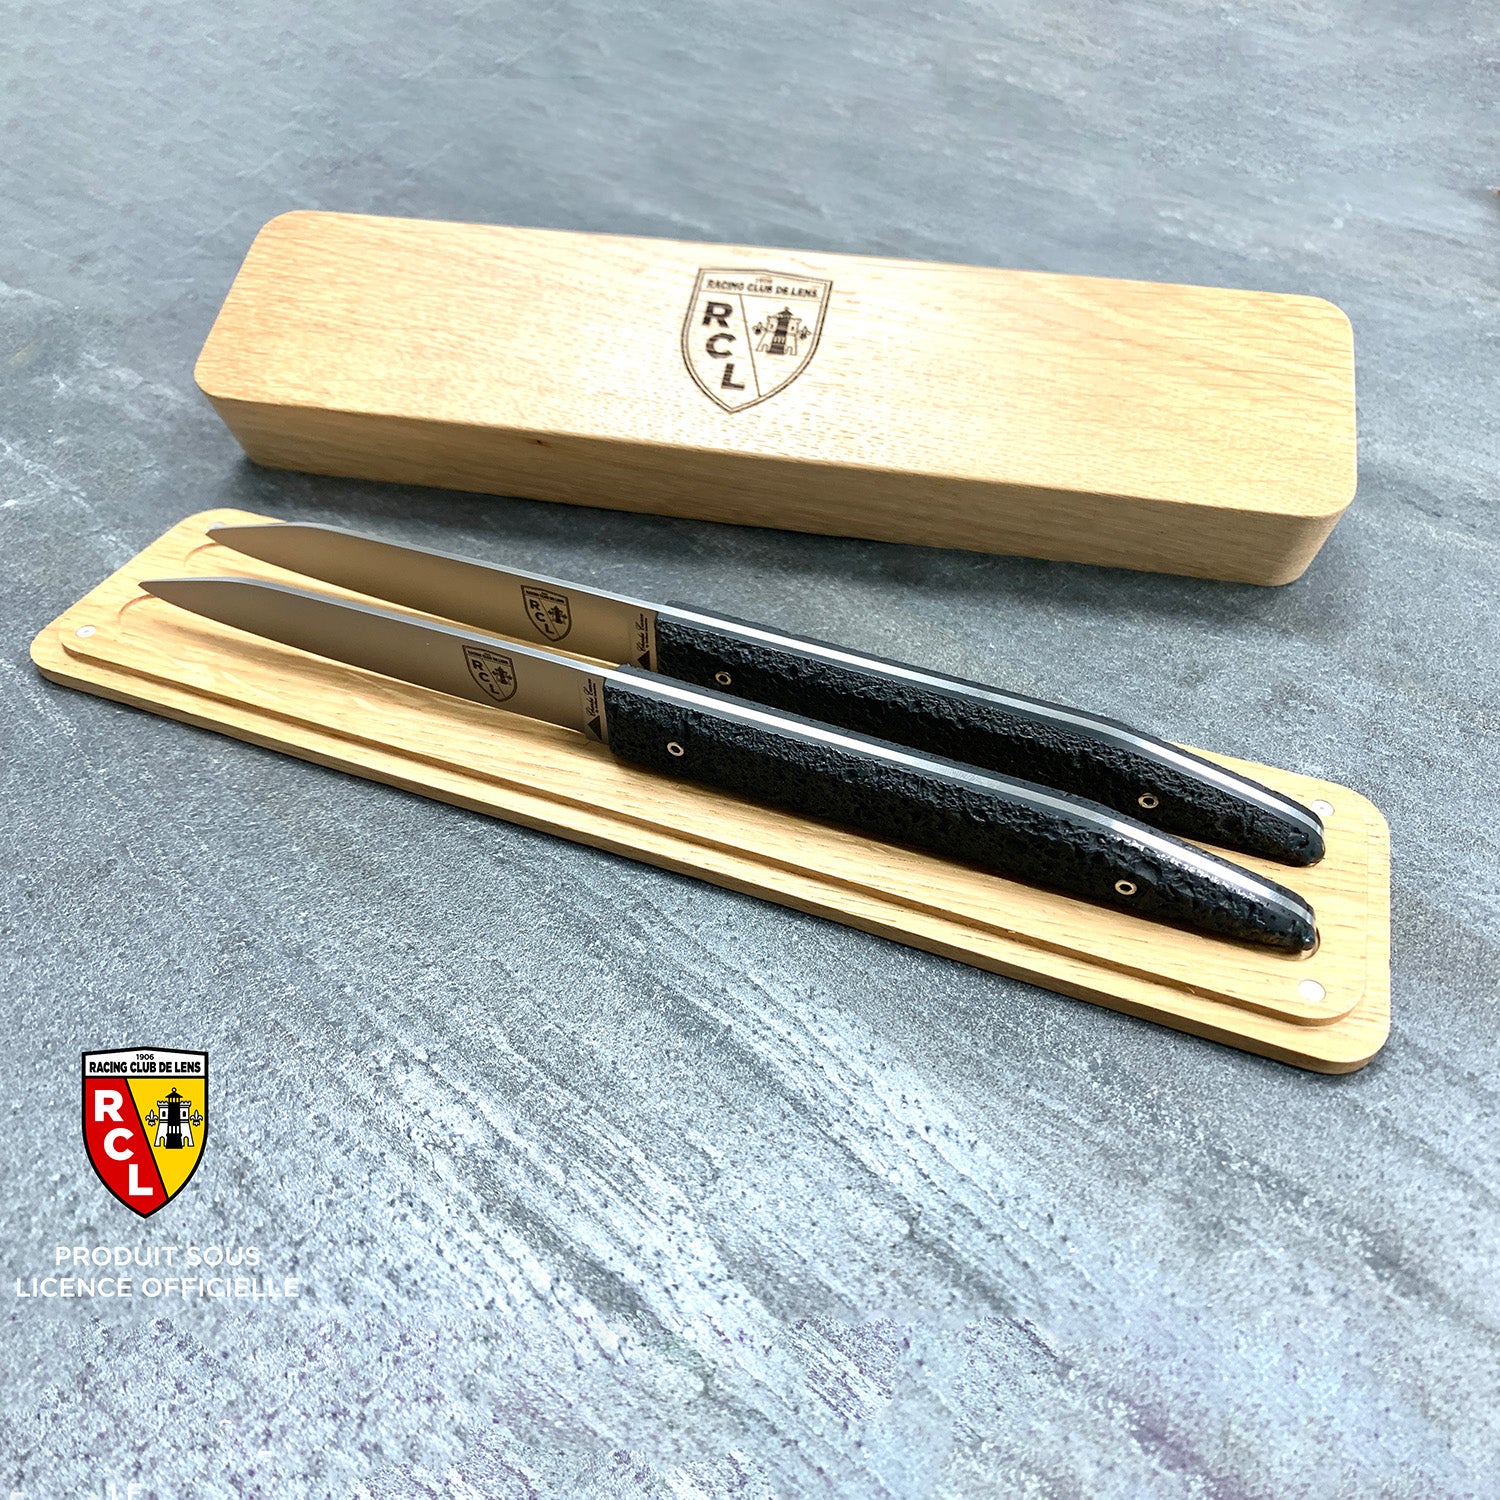 Duo box with 2 BLACK table knives, RC LENS edition (OFFICIALLY LICENSED)